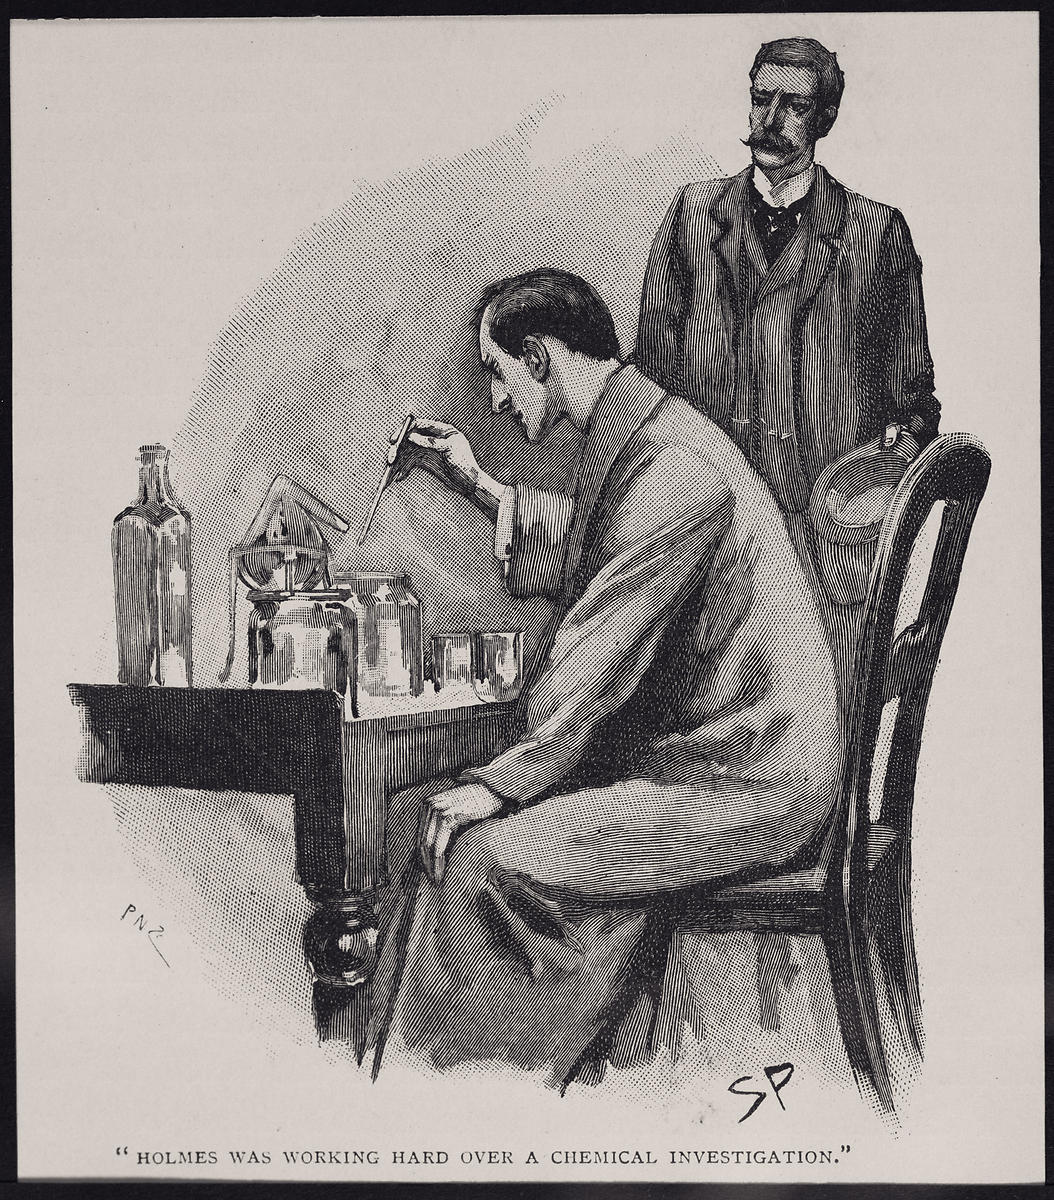 One of the original illustrations from a Sherlock Holmes story.